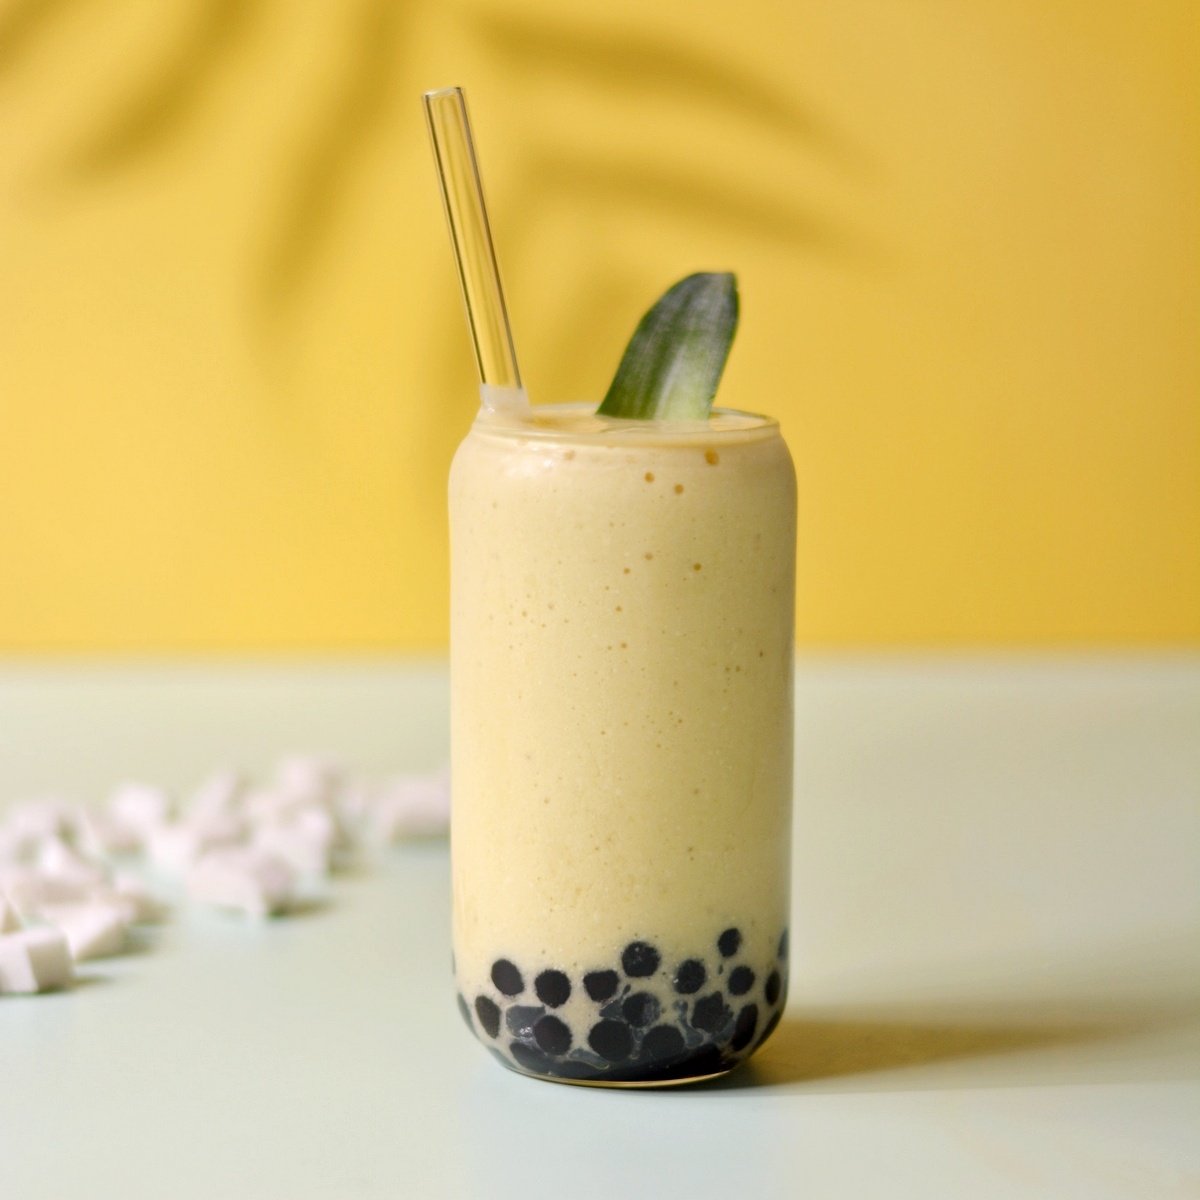 A glass cup with black boba pearls in bottom and yellow smoothie inside.